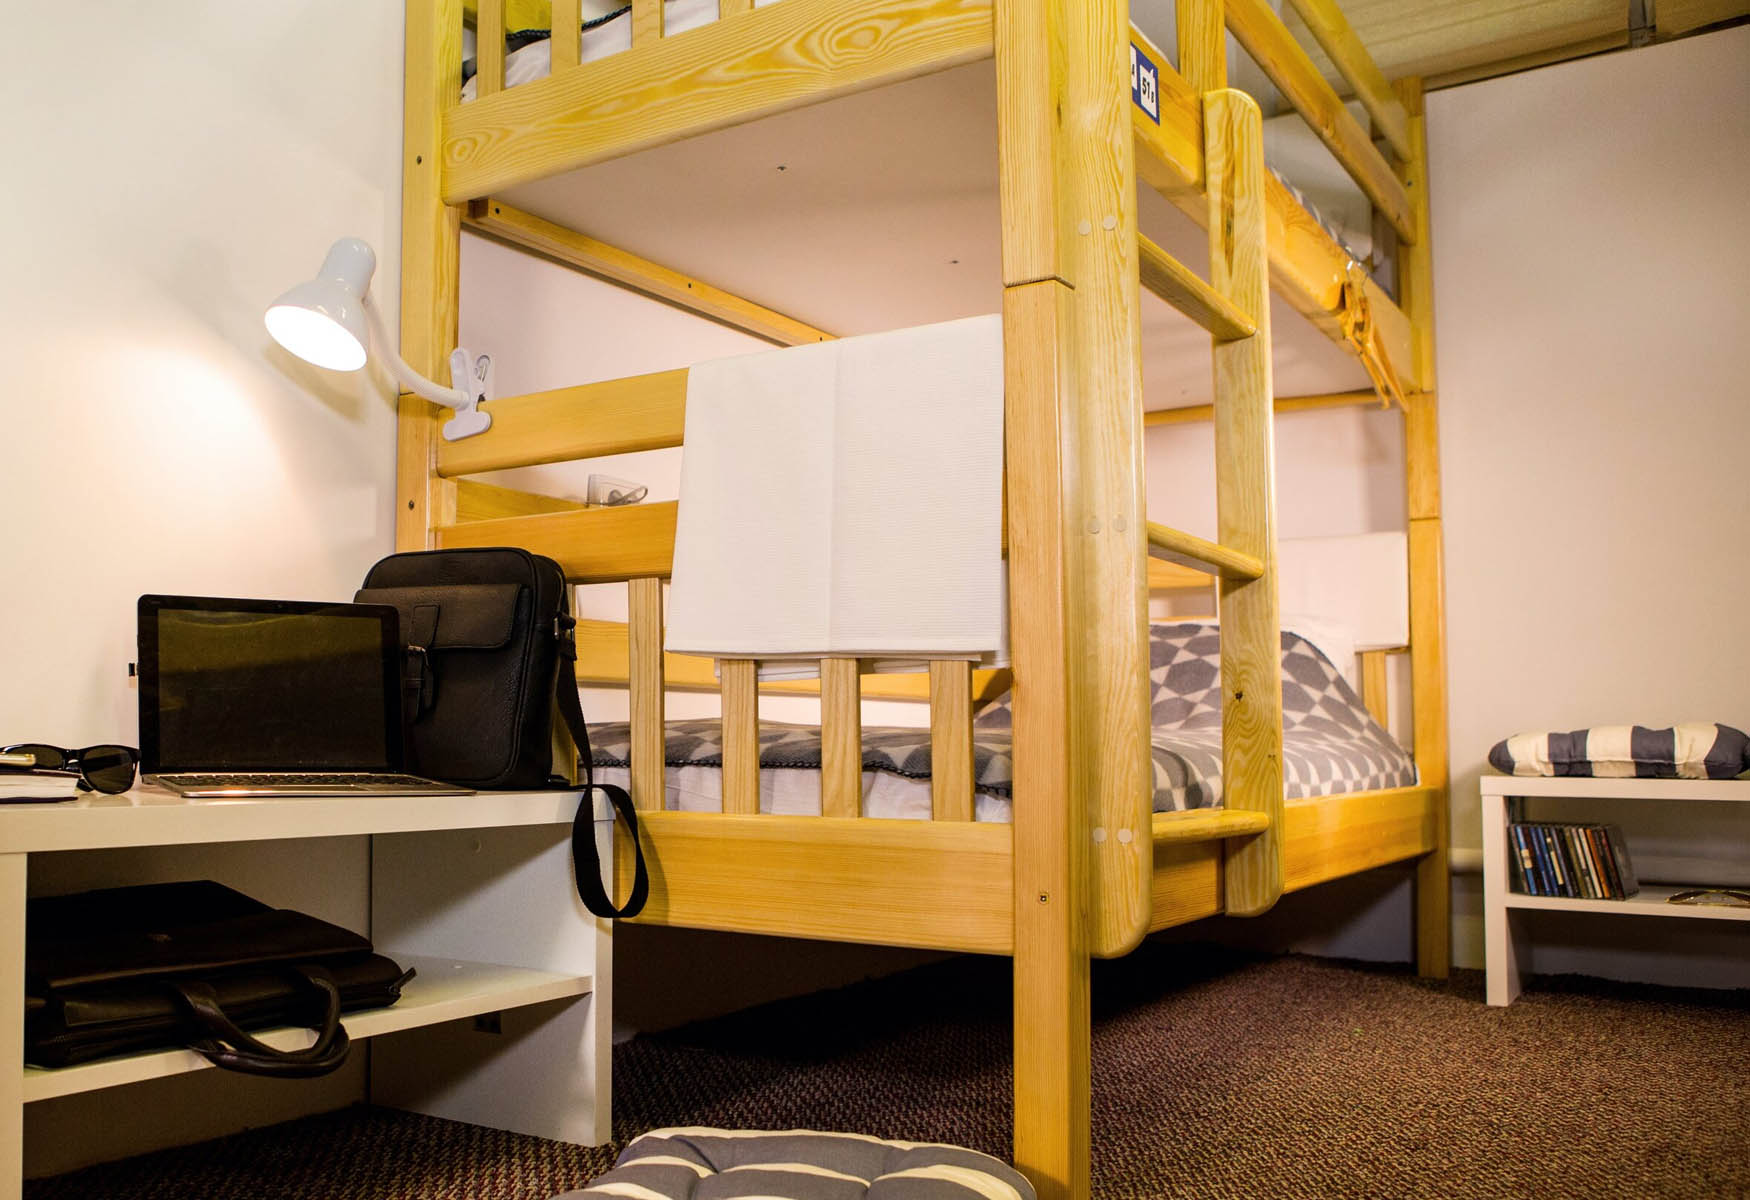 Hostel Etiquette: 8 MUST-KNOW Rules For Hostels